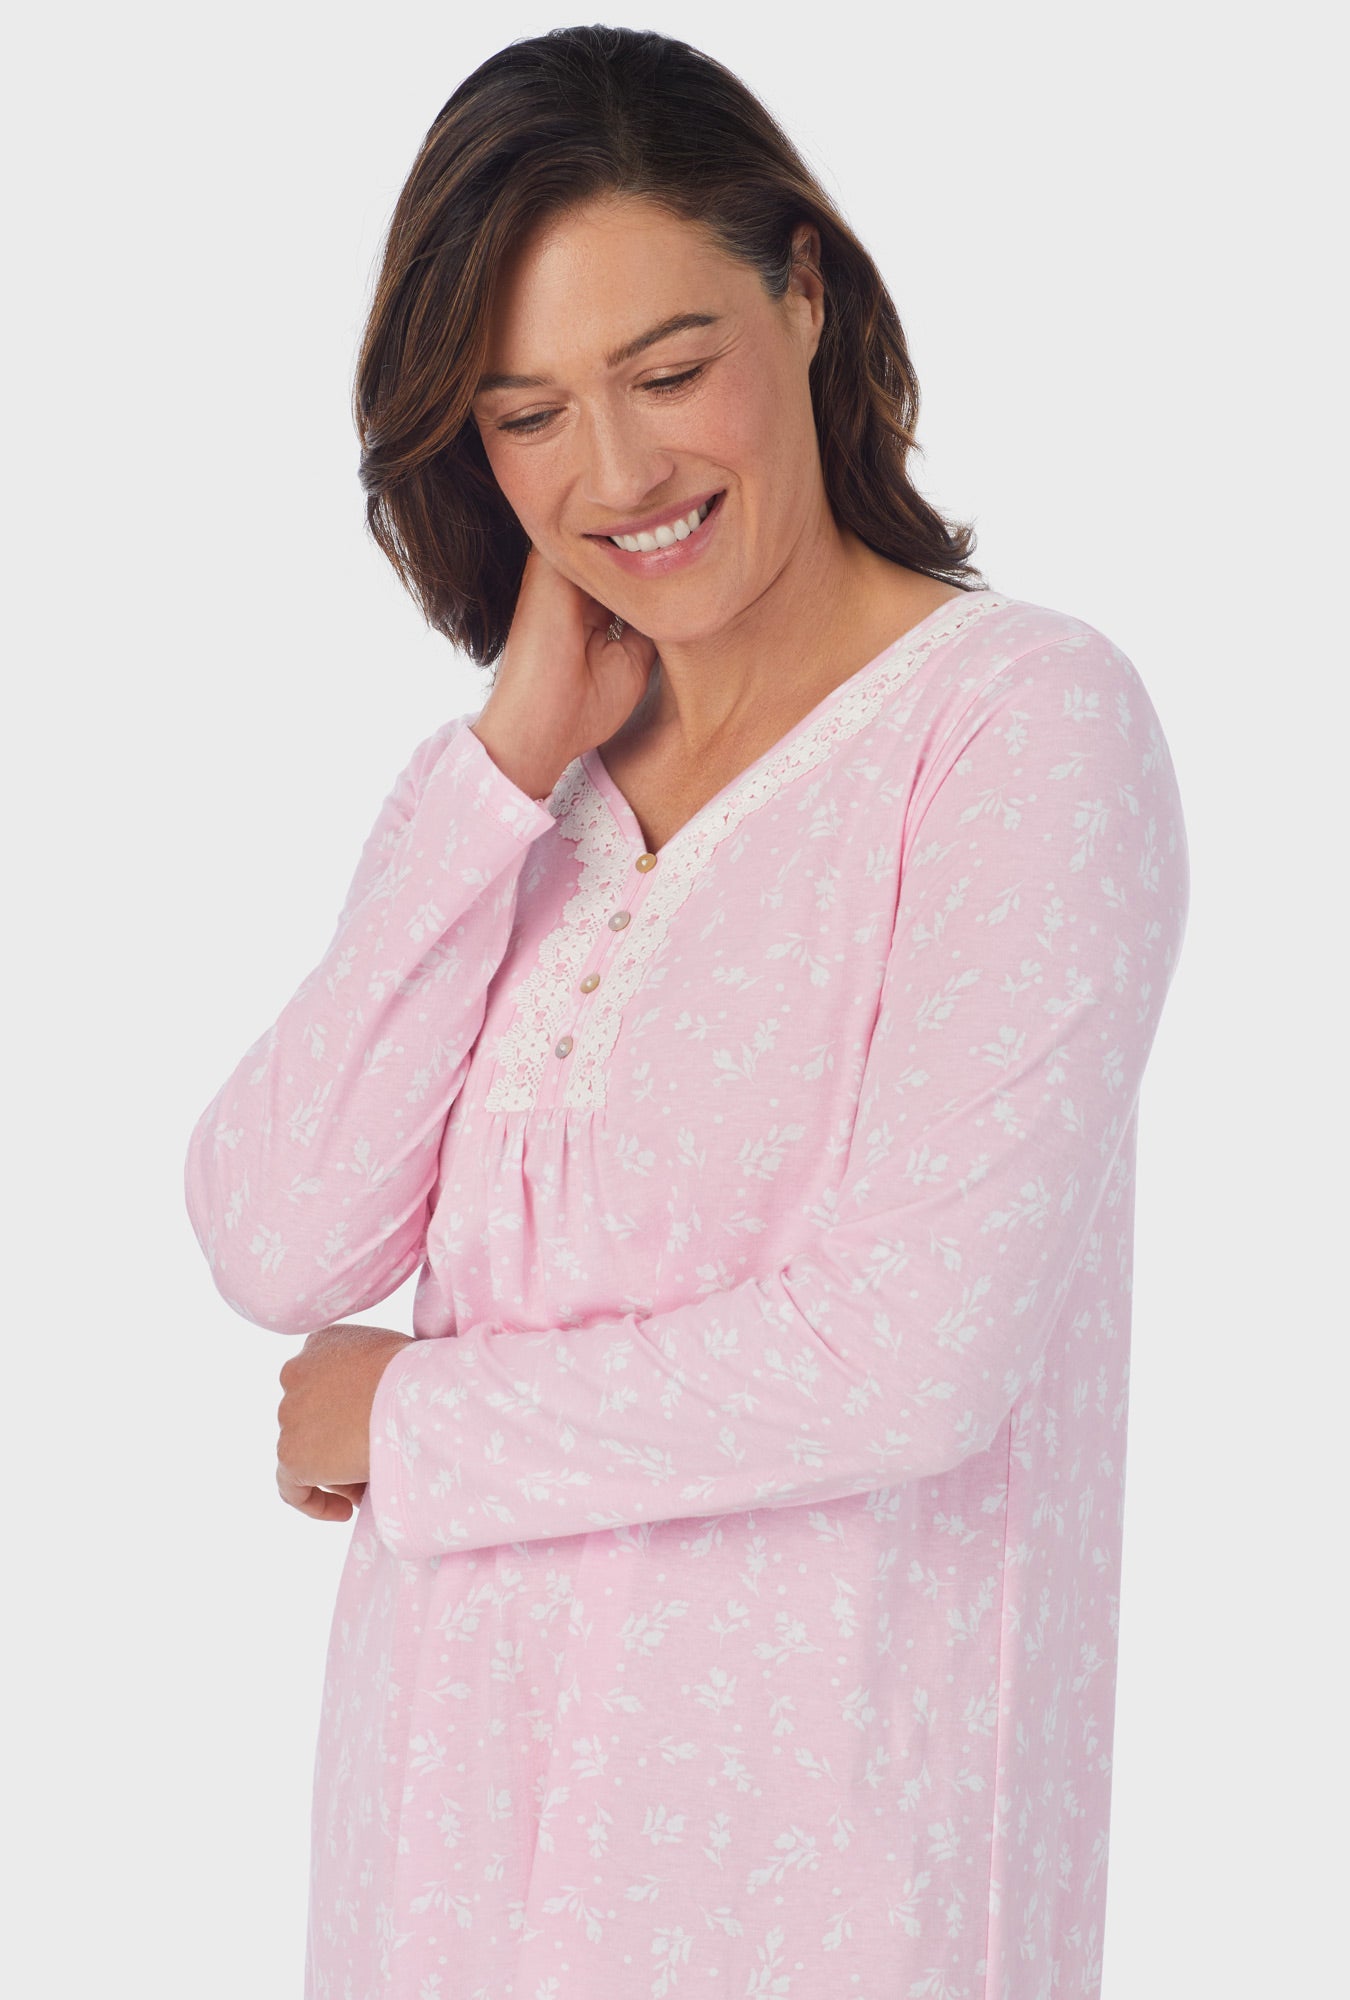 A lady wearing pink Long Sleeve Nightgown with White Rosebuds  print